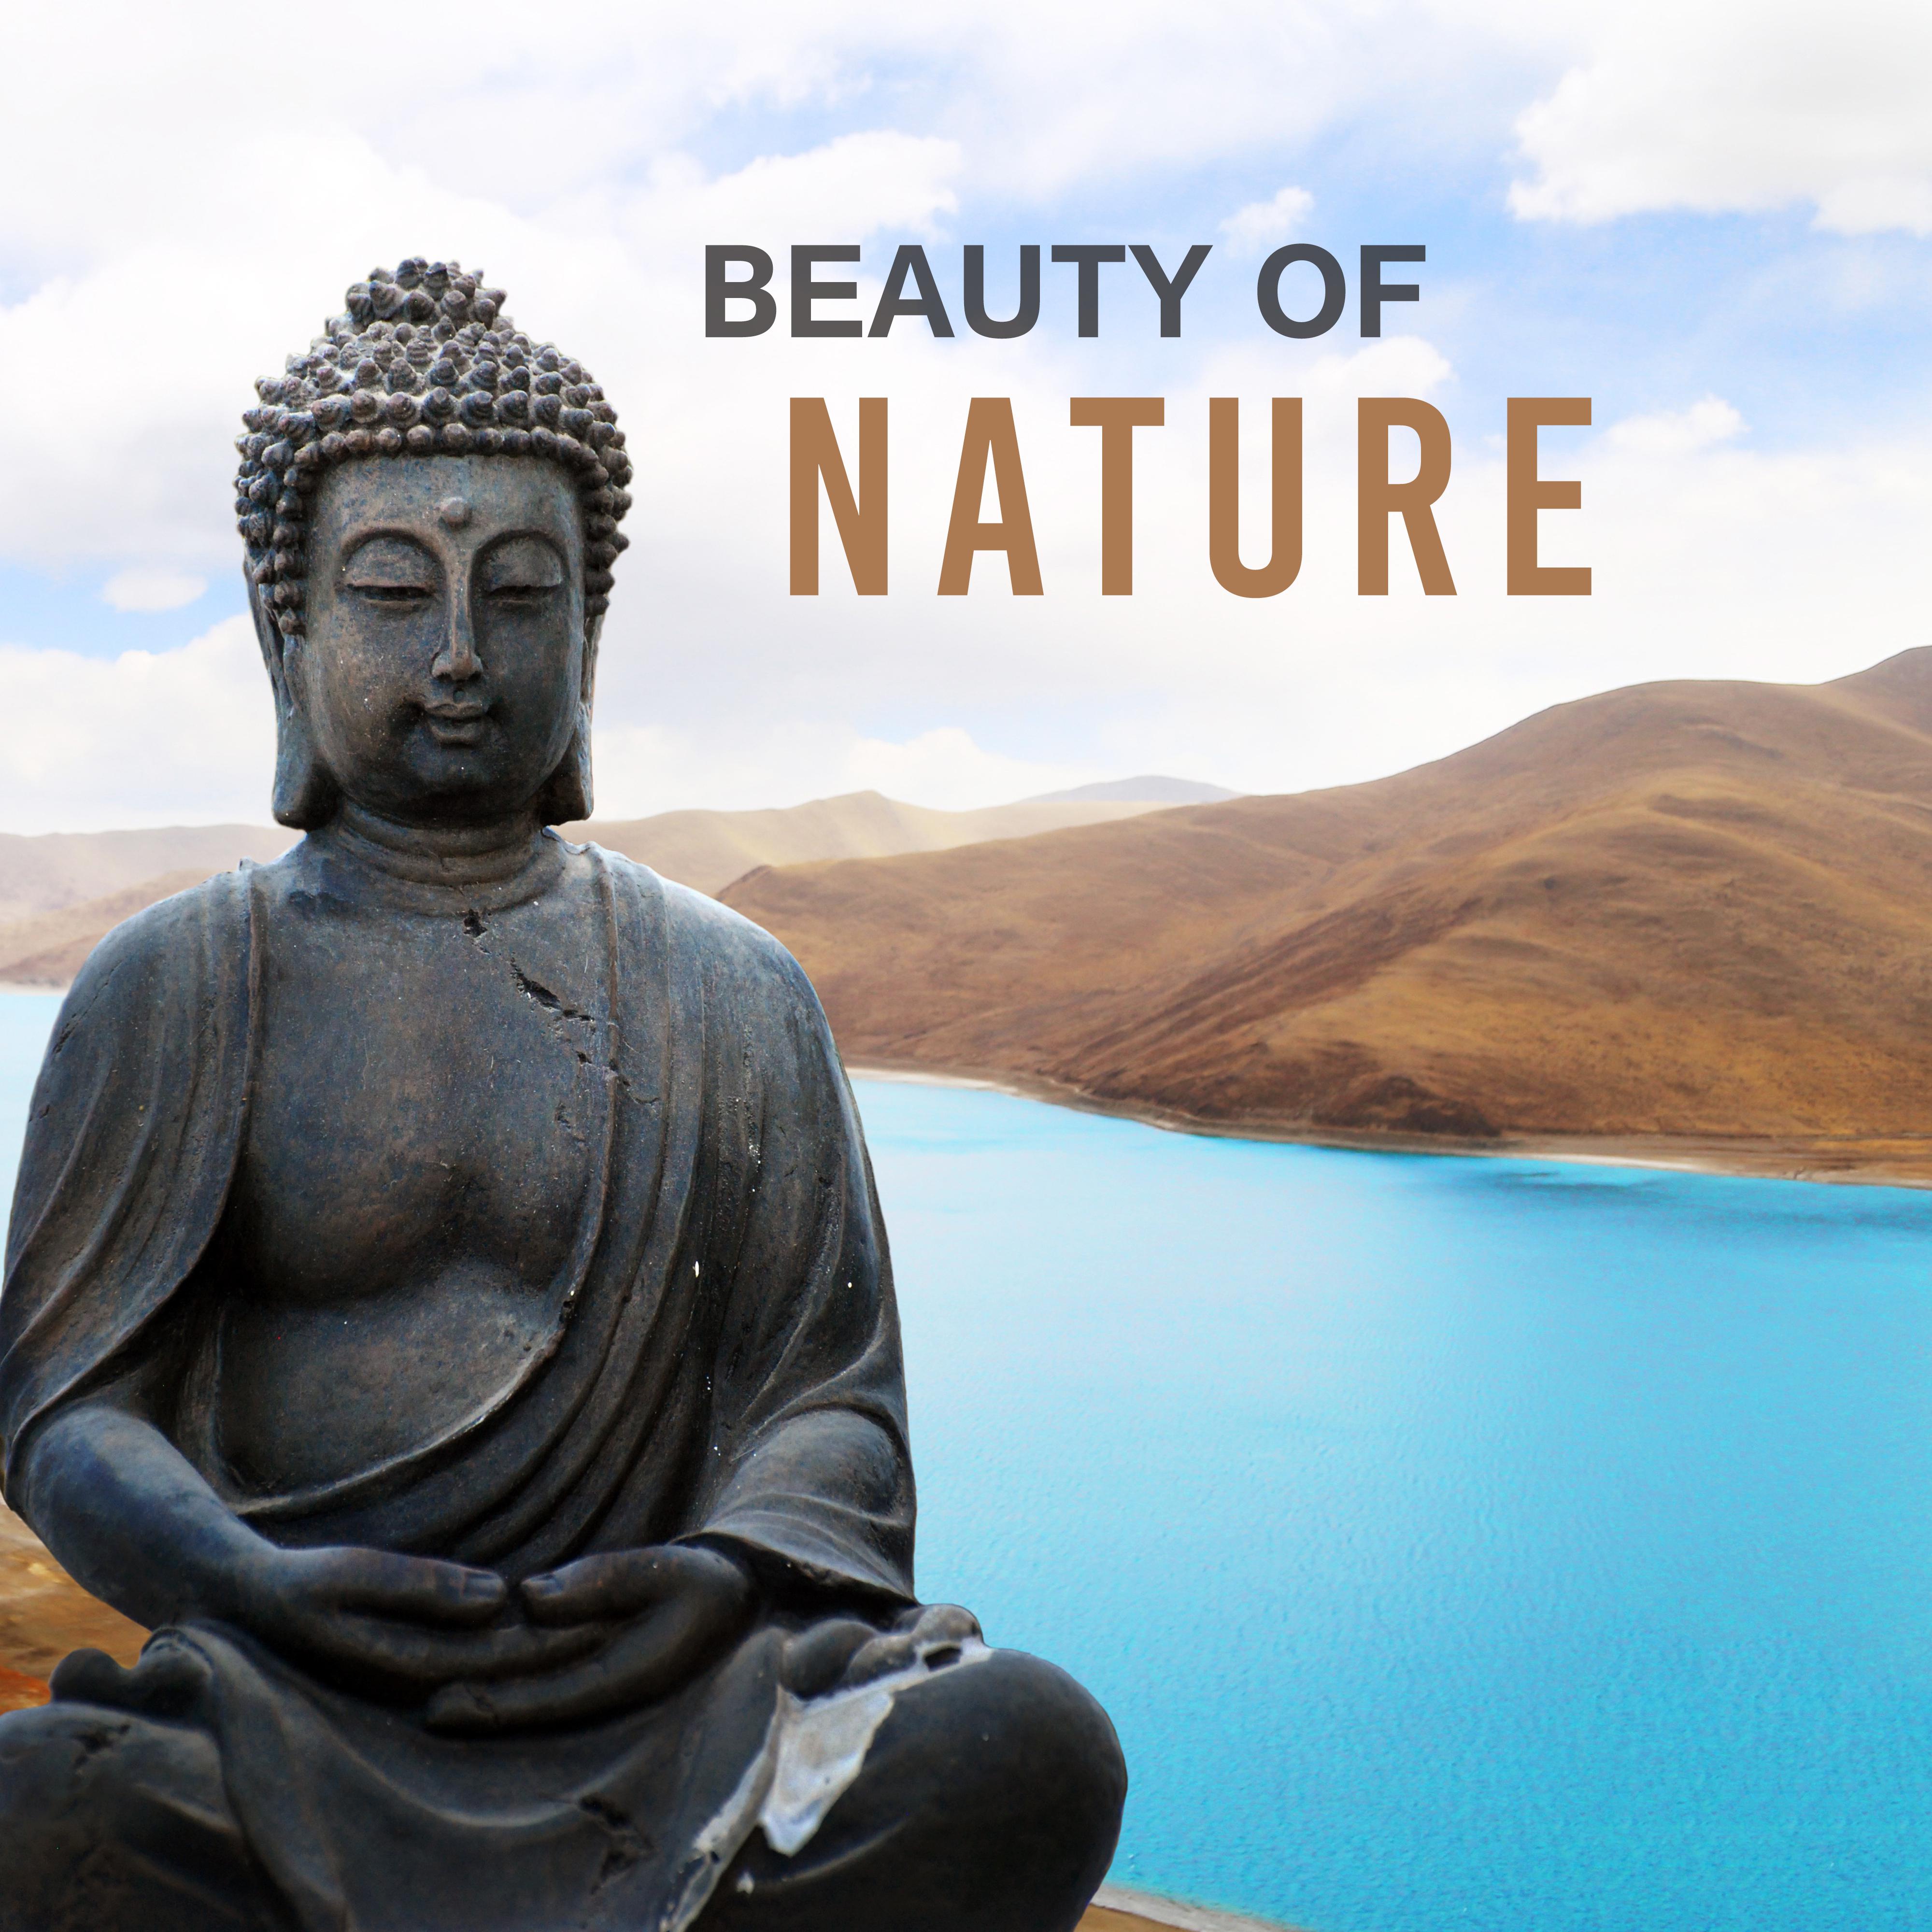 Beauty of Nature – Meditation Music, Nature Sounds, Stress Relief, Zen, Relaxation Music, Training Yoga, Tranquility & Harmony